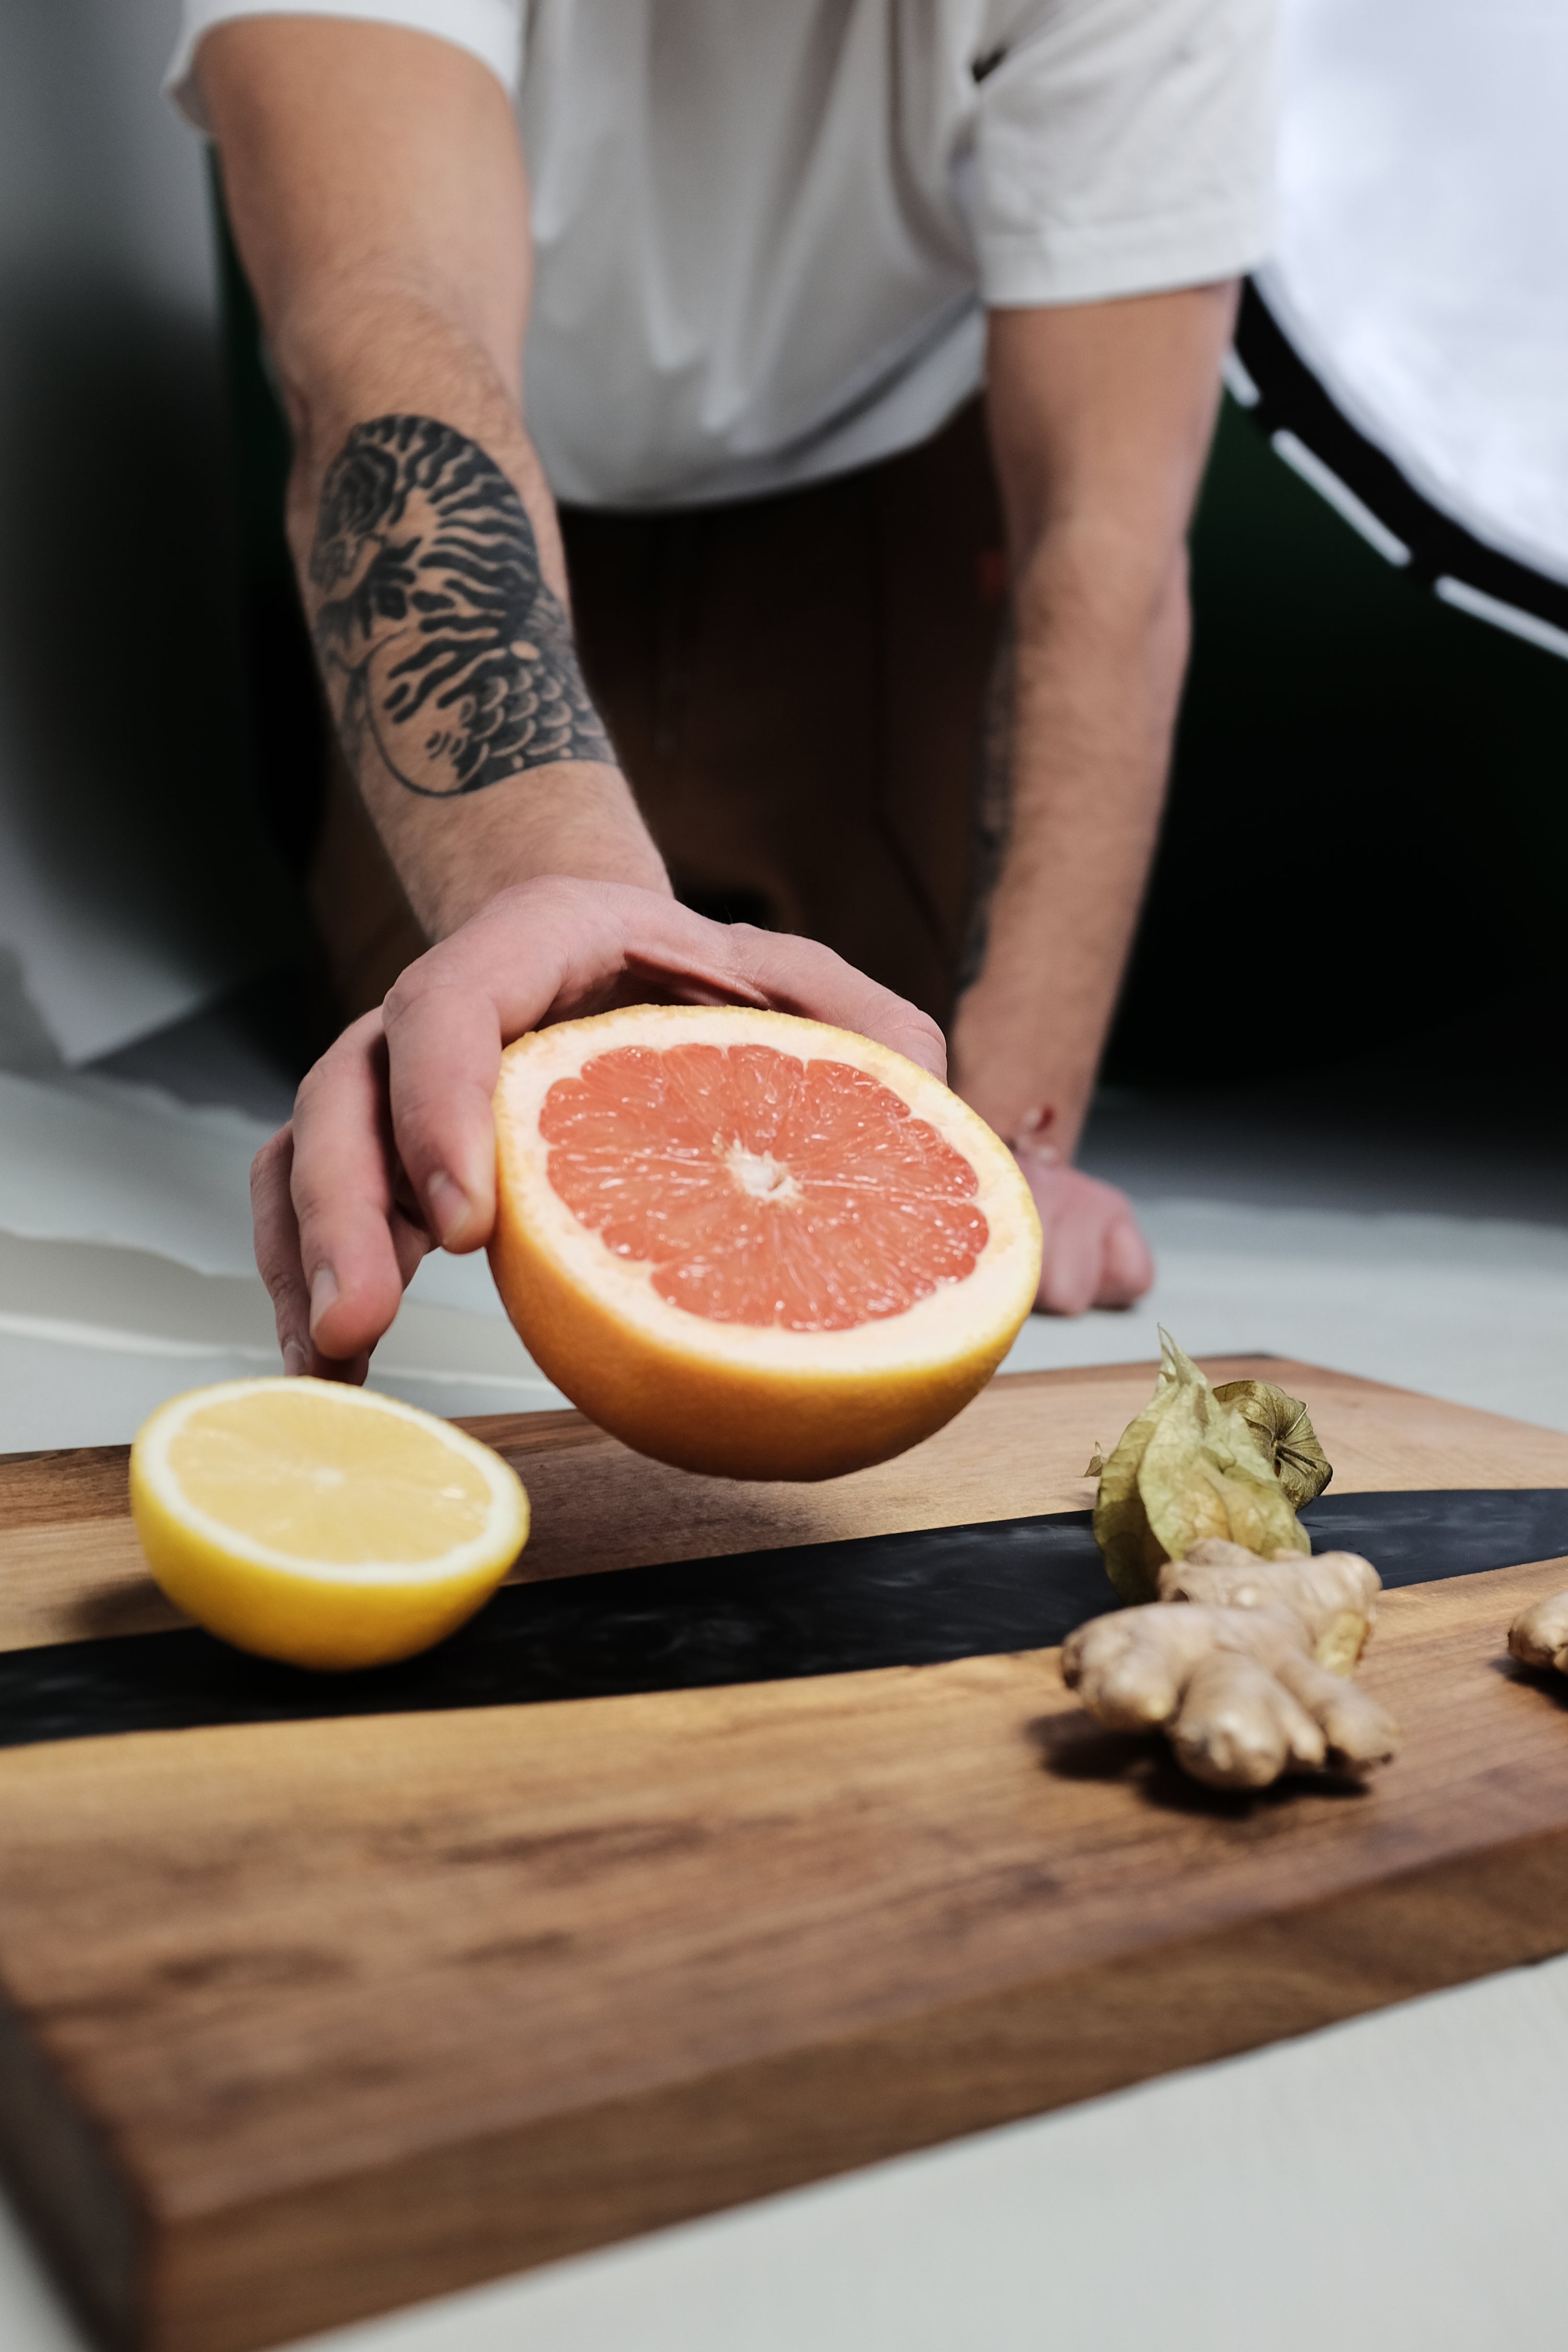 Black epoxy wooden serving board with a hand placing a grapefruit on top for decoration